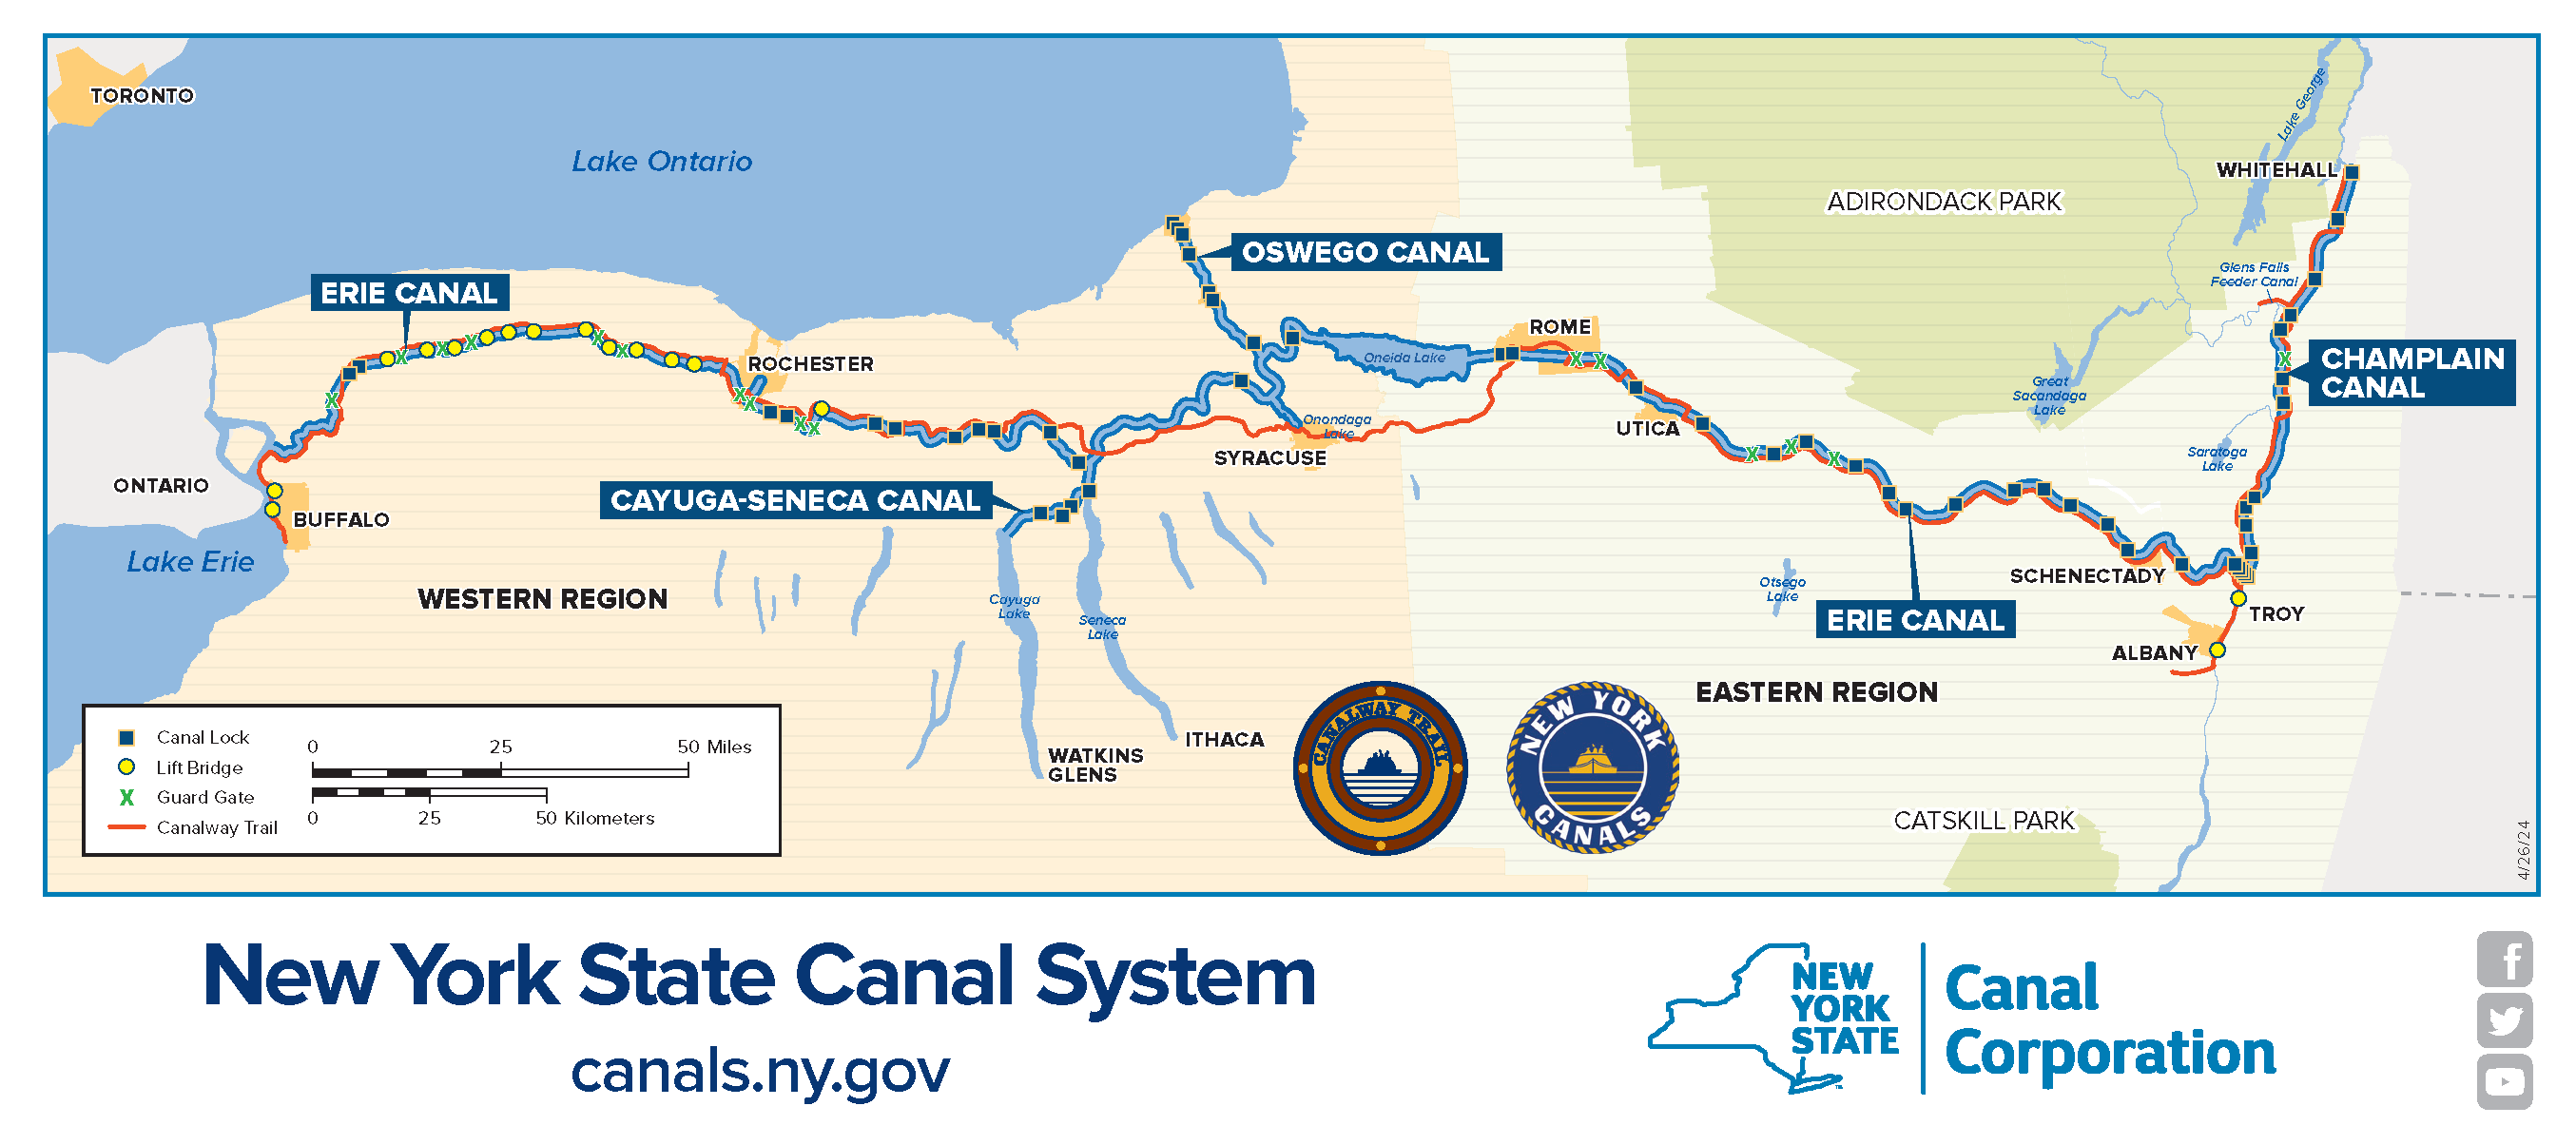 Map showing the Erie Canal, Oswego Canal, Cayuga-Seneca Canal and Champlain Canal going through the western and eastern regions of New York. The key for the map shows symbols for canal locks, lift bridges, guard gates and the canalway trail. The key also shows a miles to kilometers converter. The logos at the bottom of the map are two round logos for Canalway Trail and New York Canals and two larger logos for New York State Canal System canals.ny.gov and New York State Canal Corporation.